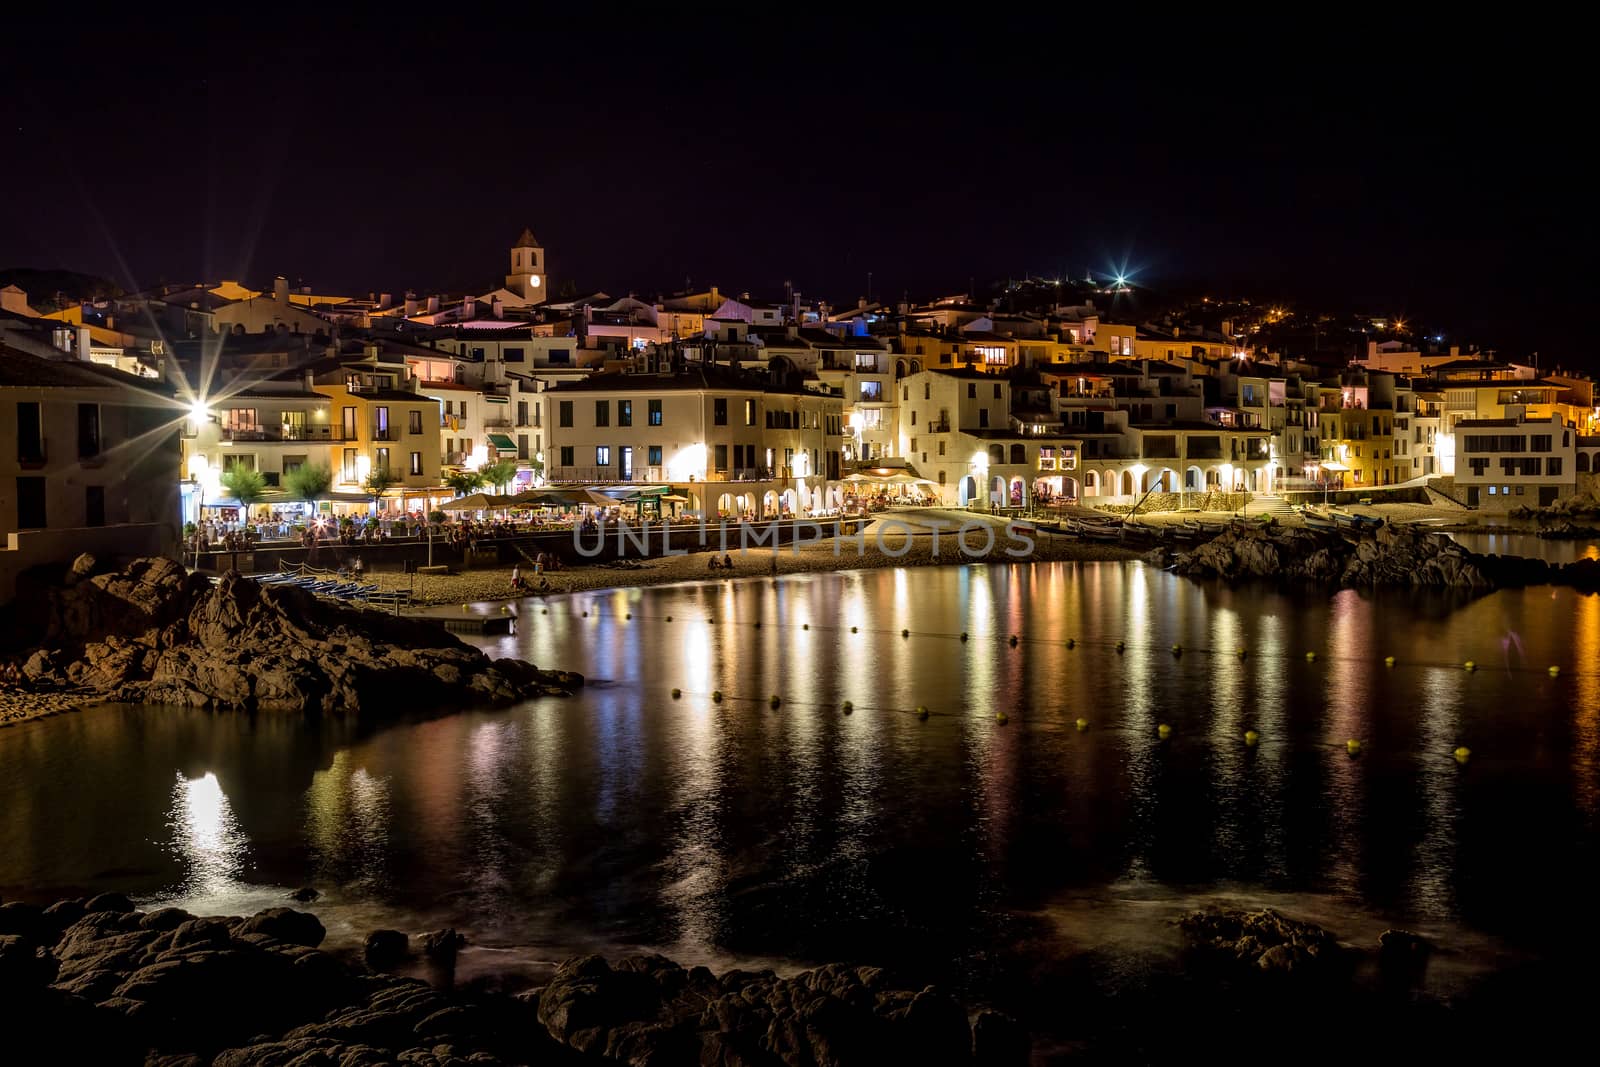 At the night in Calella (small village in Spain)